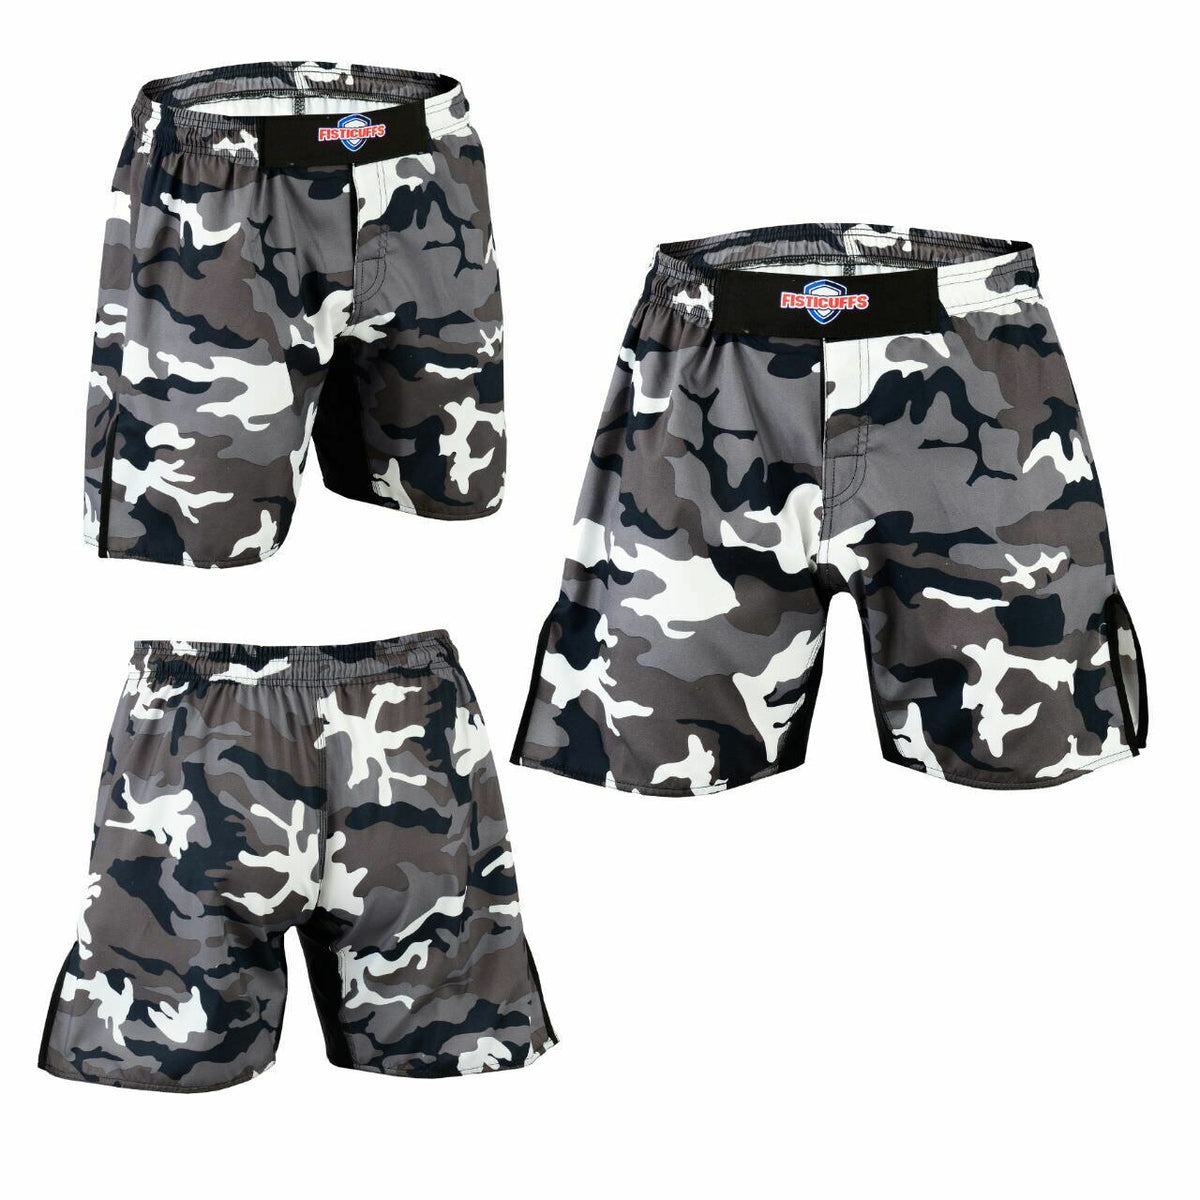 Fisticuffs Camo Grey MMA Boxing Fight Grappling Kick Cage Fighting Short Shorts - Hamtons Direct